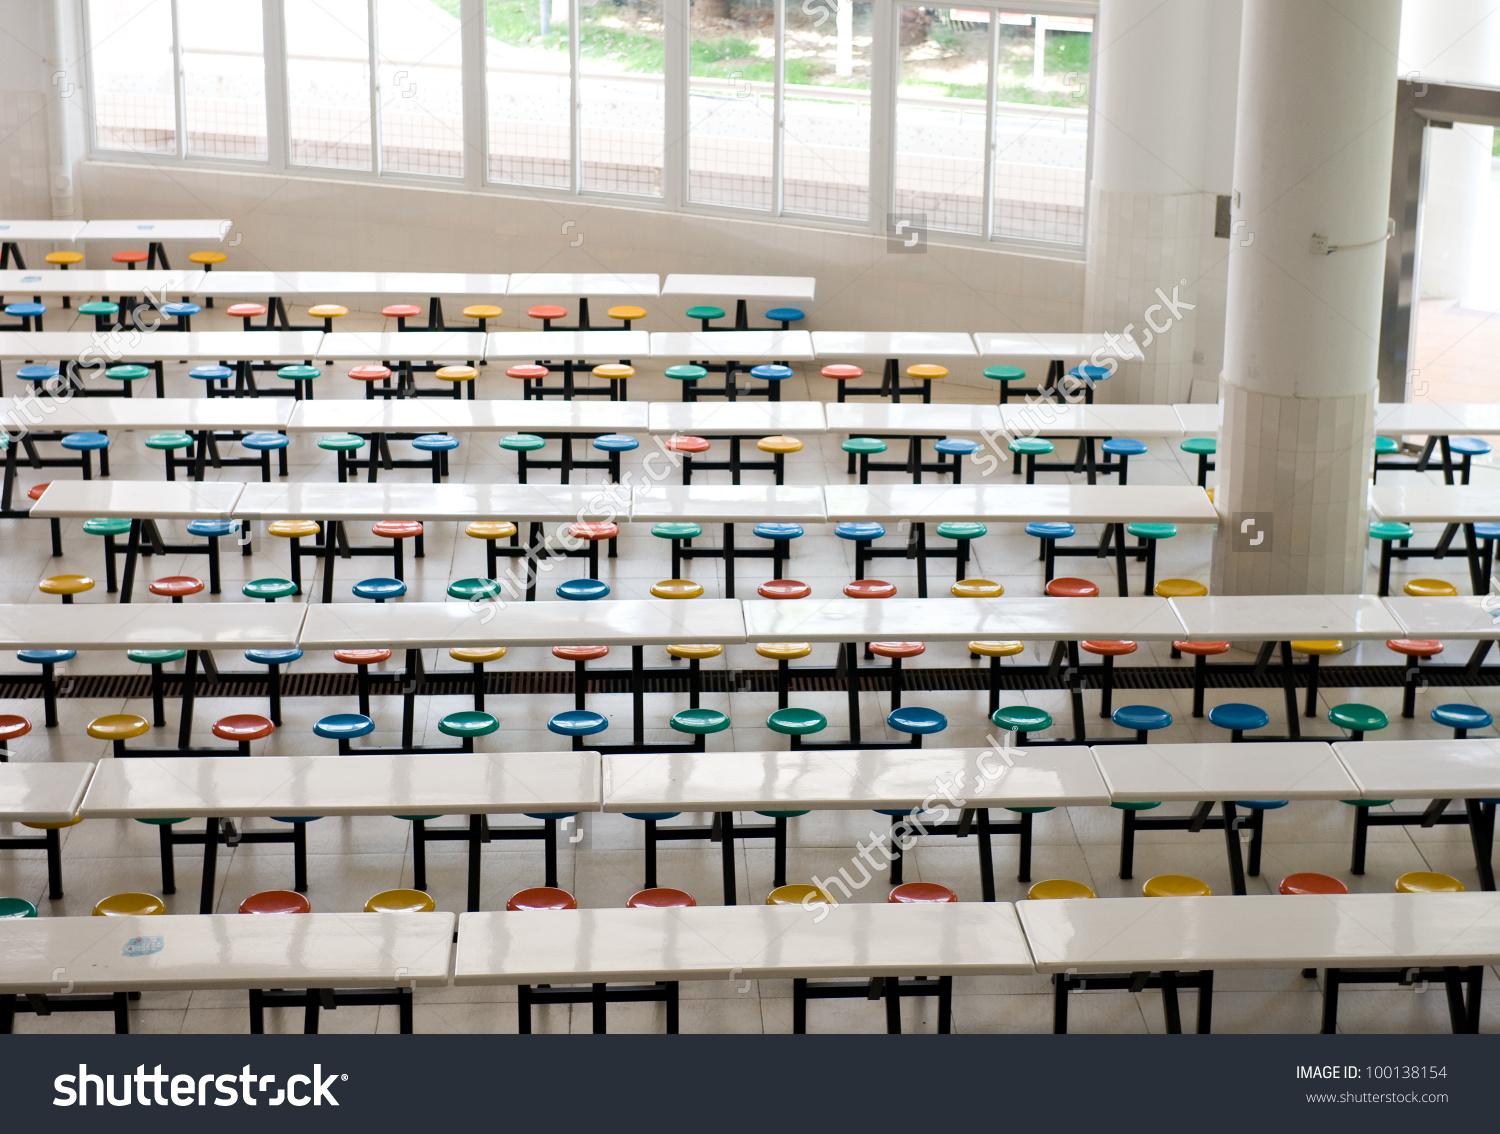 Clean School Cafeteria Many Empty Seats Stock Photo 100138154.